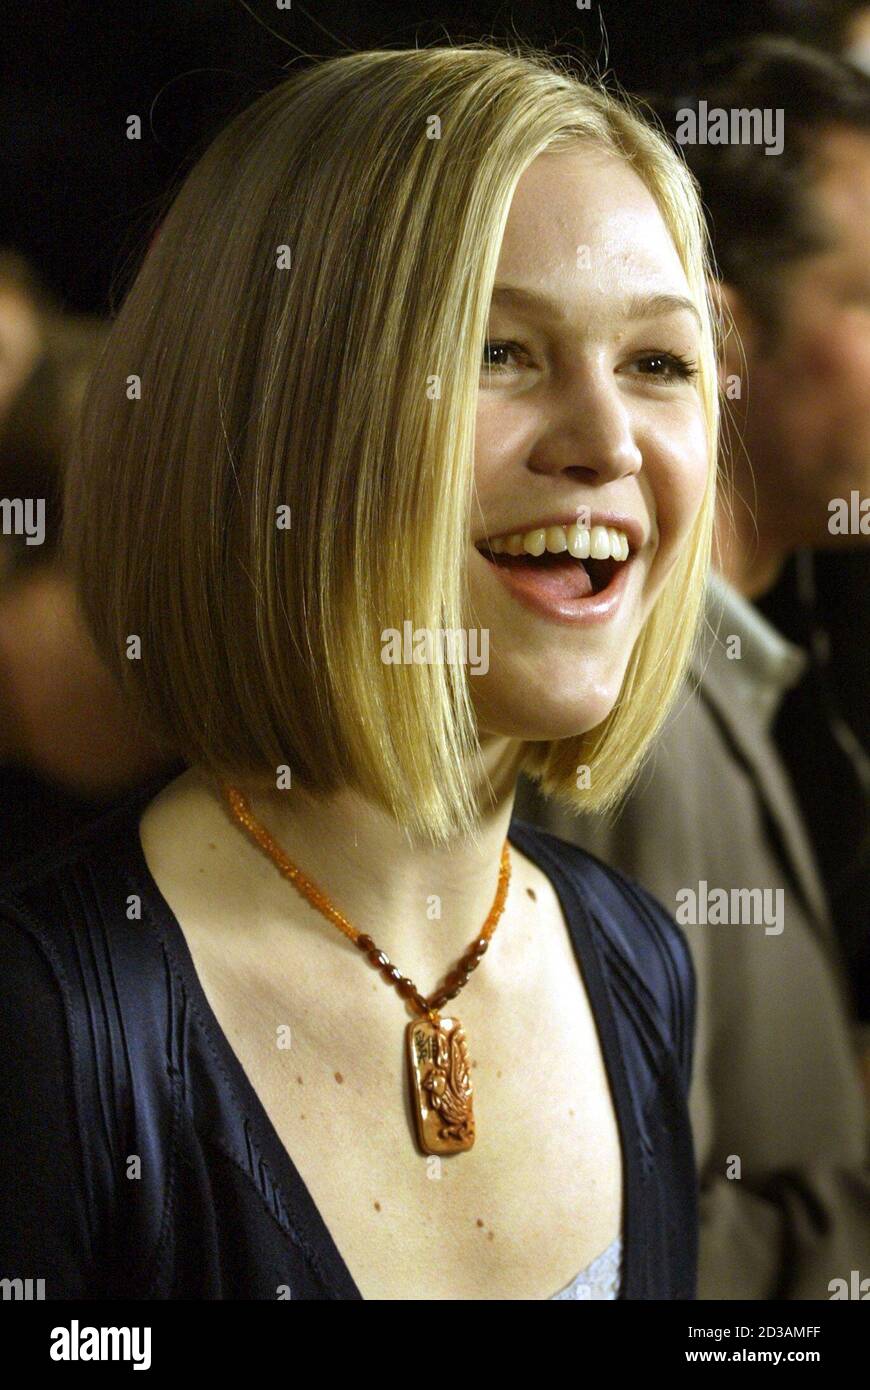 Actress Julia Stiles laughs during an interview at the premiere of "A Guy  Thing," on January 14, 2003 in Los Angeles. Stiles stars in the movie,  which opens in the United States